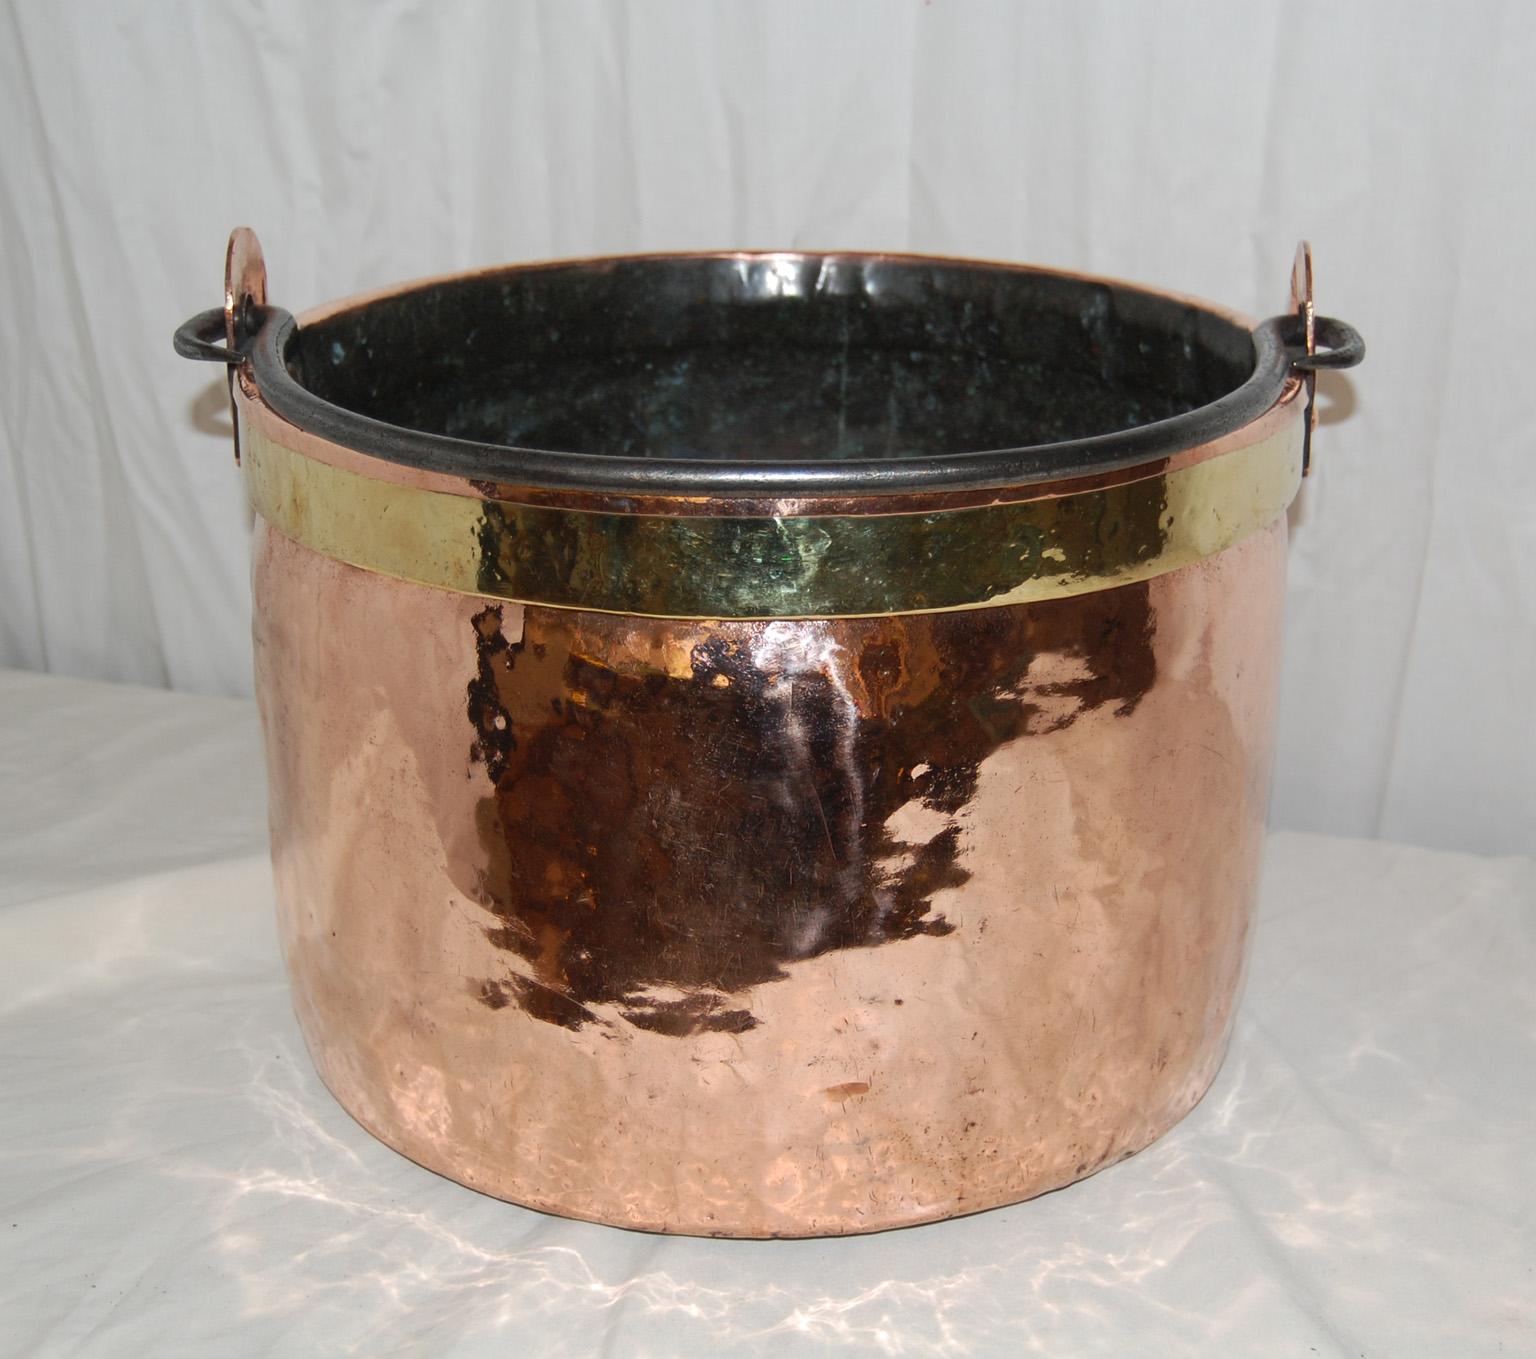 

  French mid 19th century large copper cauldron with brass rim.  This very heavy duty dovetailed cauldron has an iron swing handle and a thick band of brass just under the rim on the outside.  The French quite often reinforced these large kettles